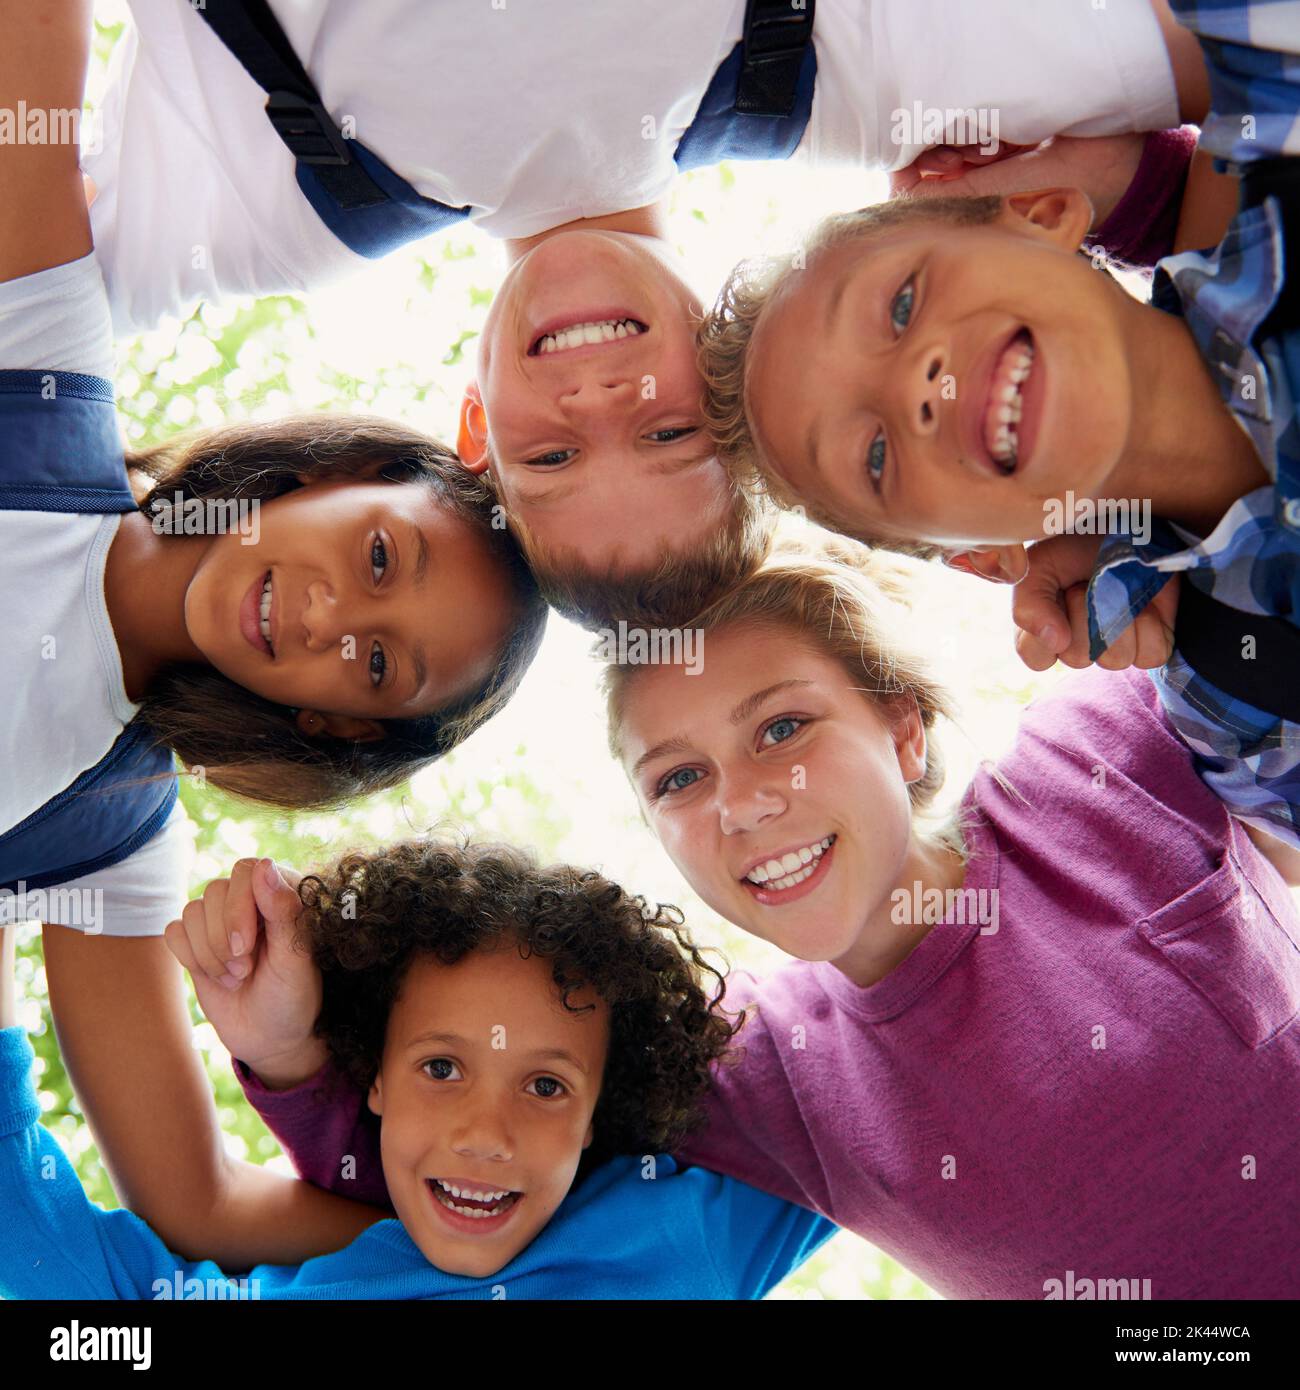 Playing, laughing and learning. elementary school kids. Stock Photo